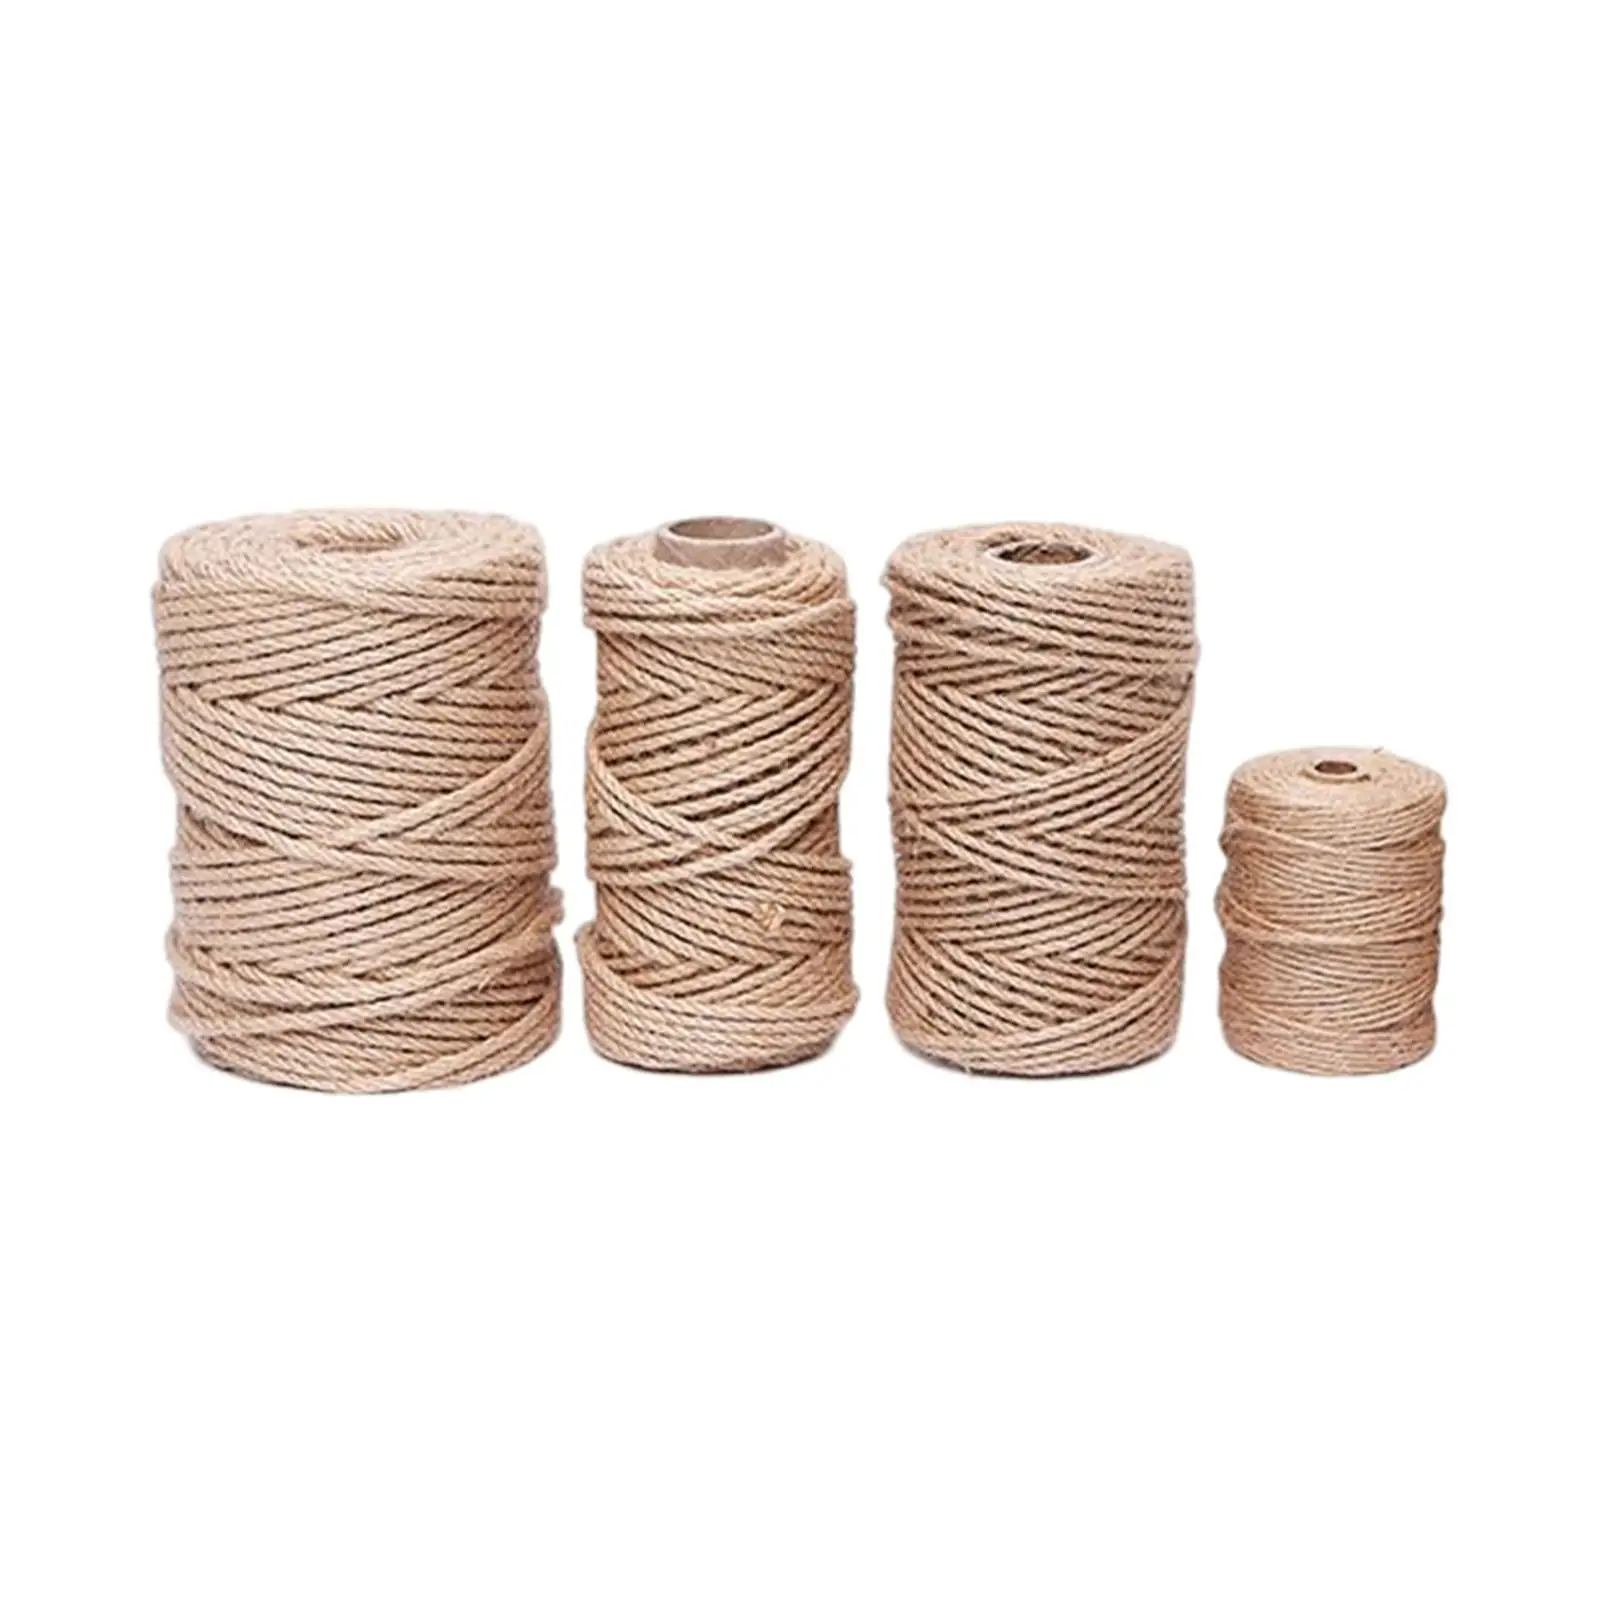 Sisal Twine Replacement Rope Hemp Rope Twisted Sisal Rope for Cat Toys Scratching Post Cat Climbing Frame Repairing DIY Projects